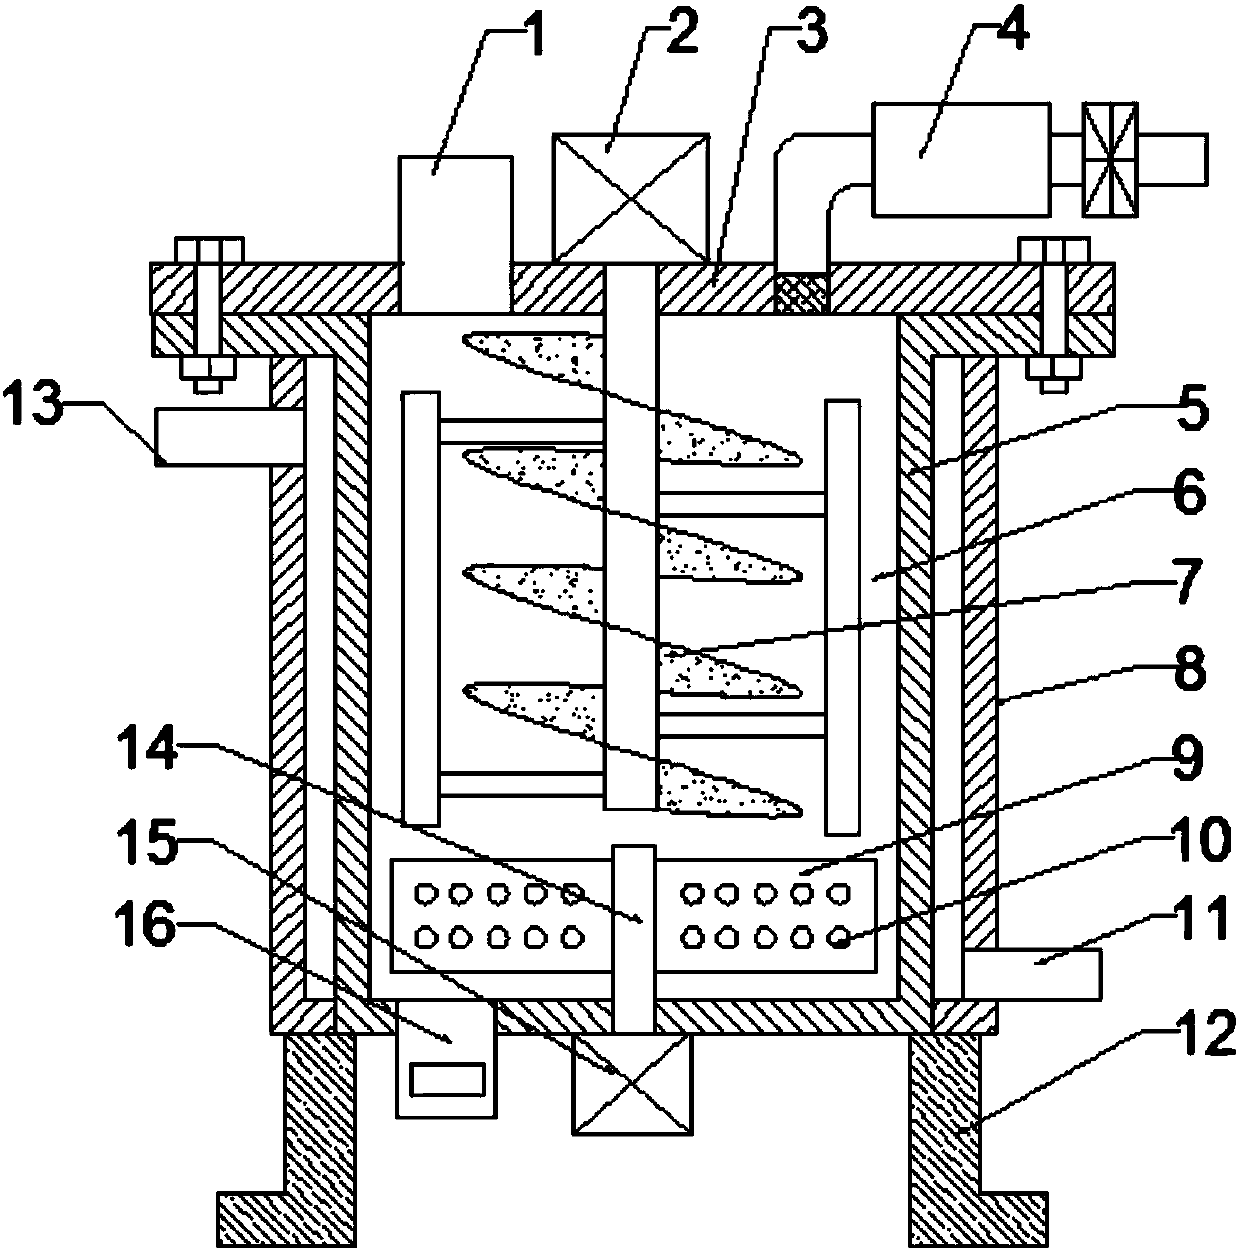 Water-cooled cooling device for processing fermented feed